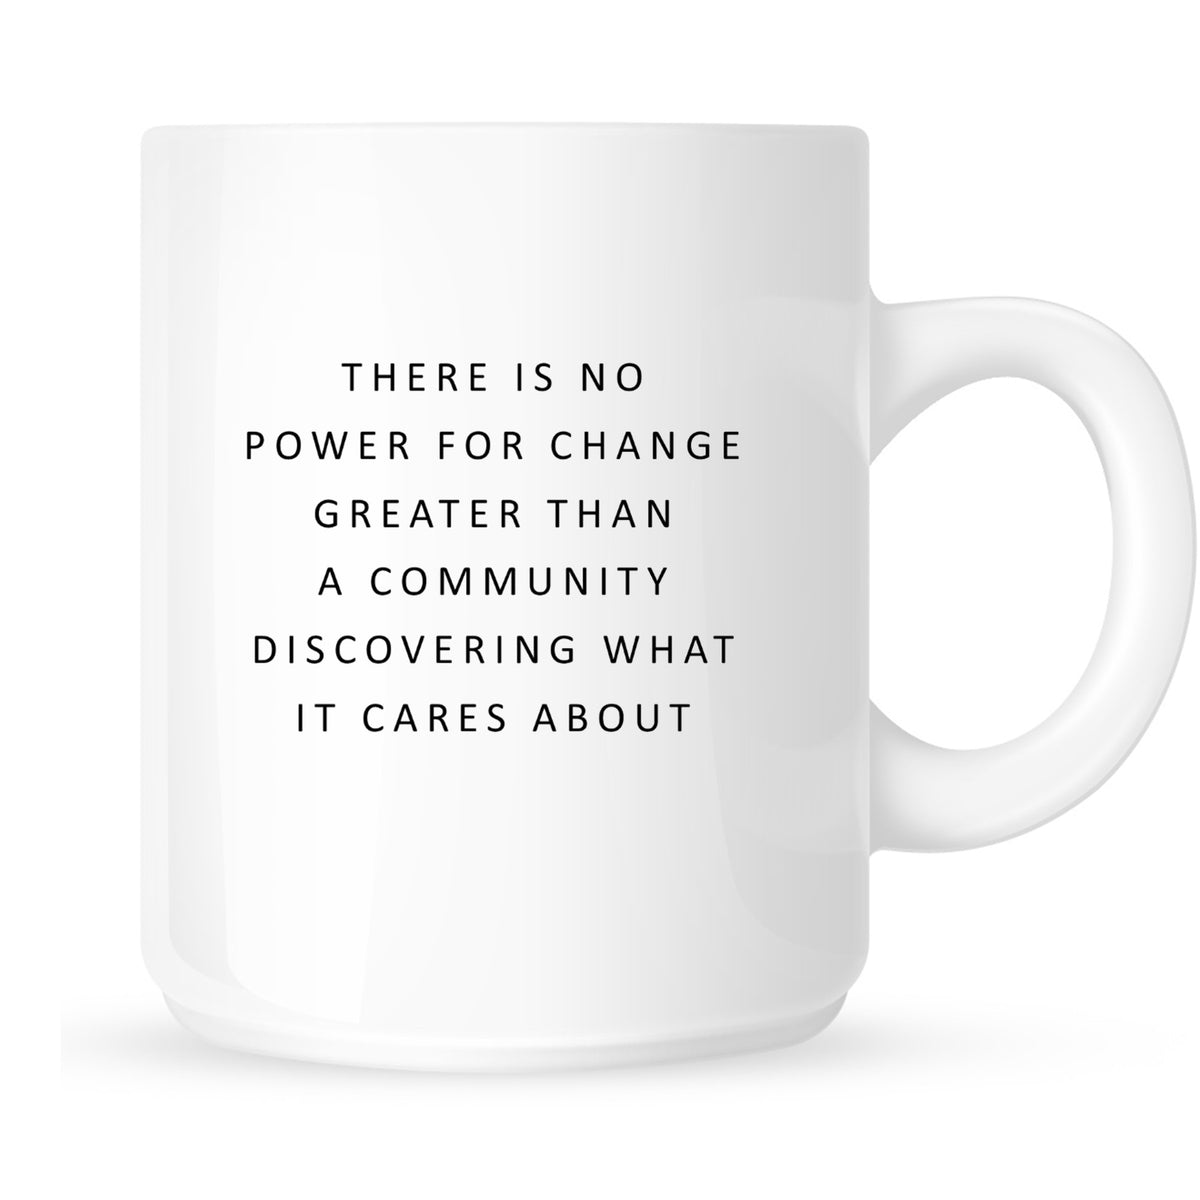 Mug - There is No Power for Change Greater than Community Discovering What it Cares About